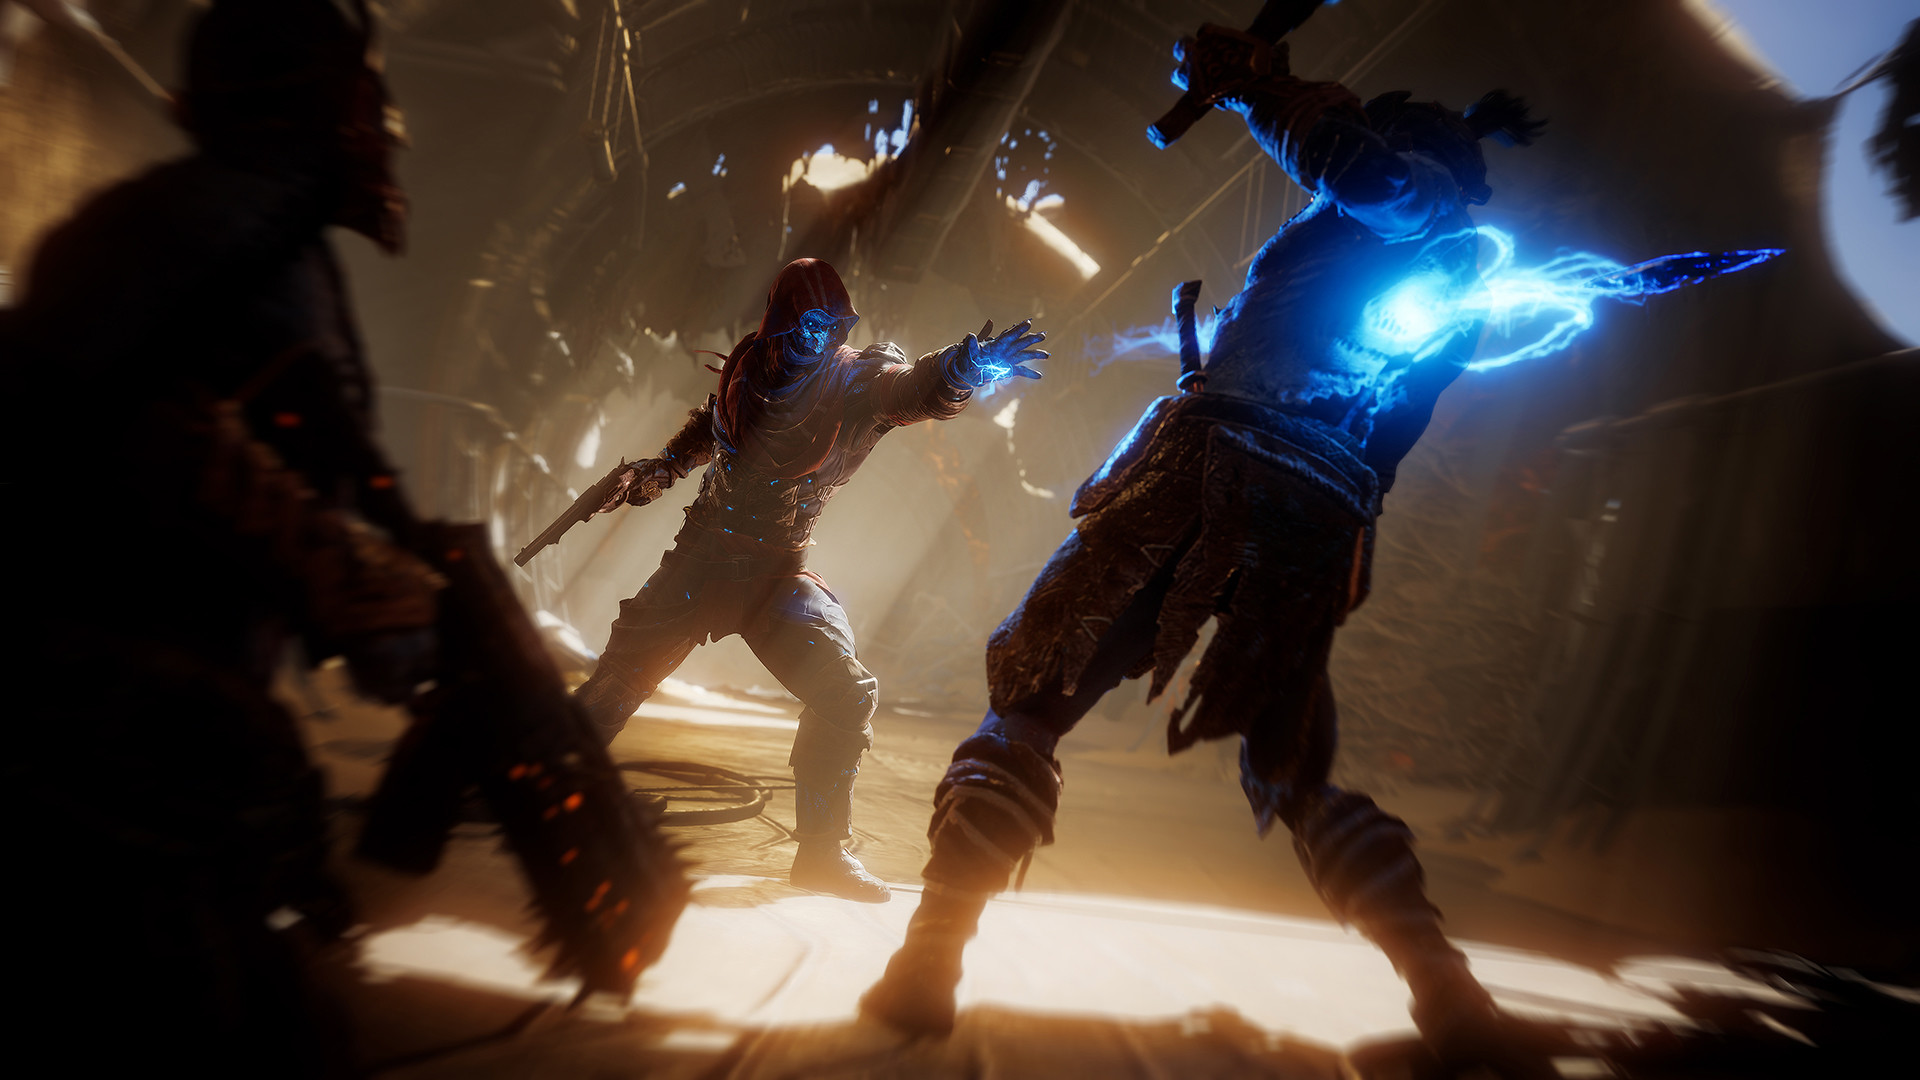 People Can Fly's Outriders screenshot showing off a character spearing another with a blue beam of light.